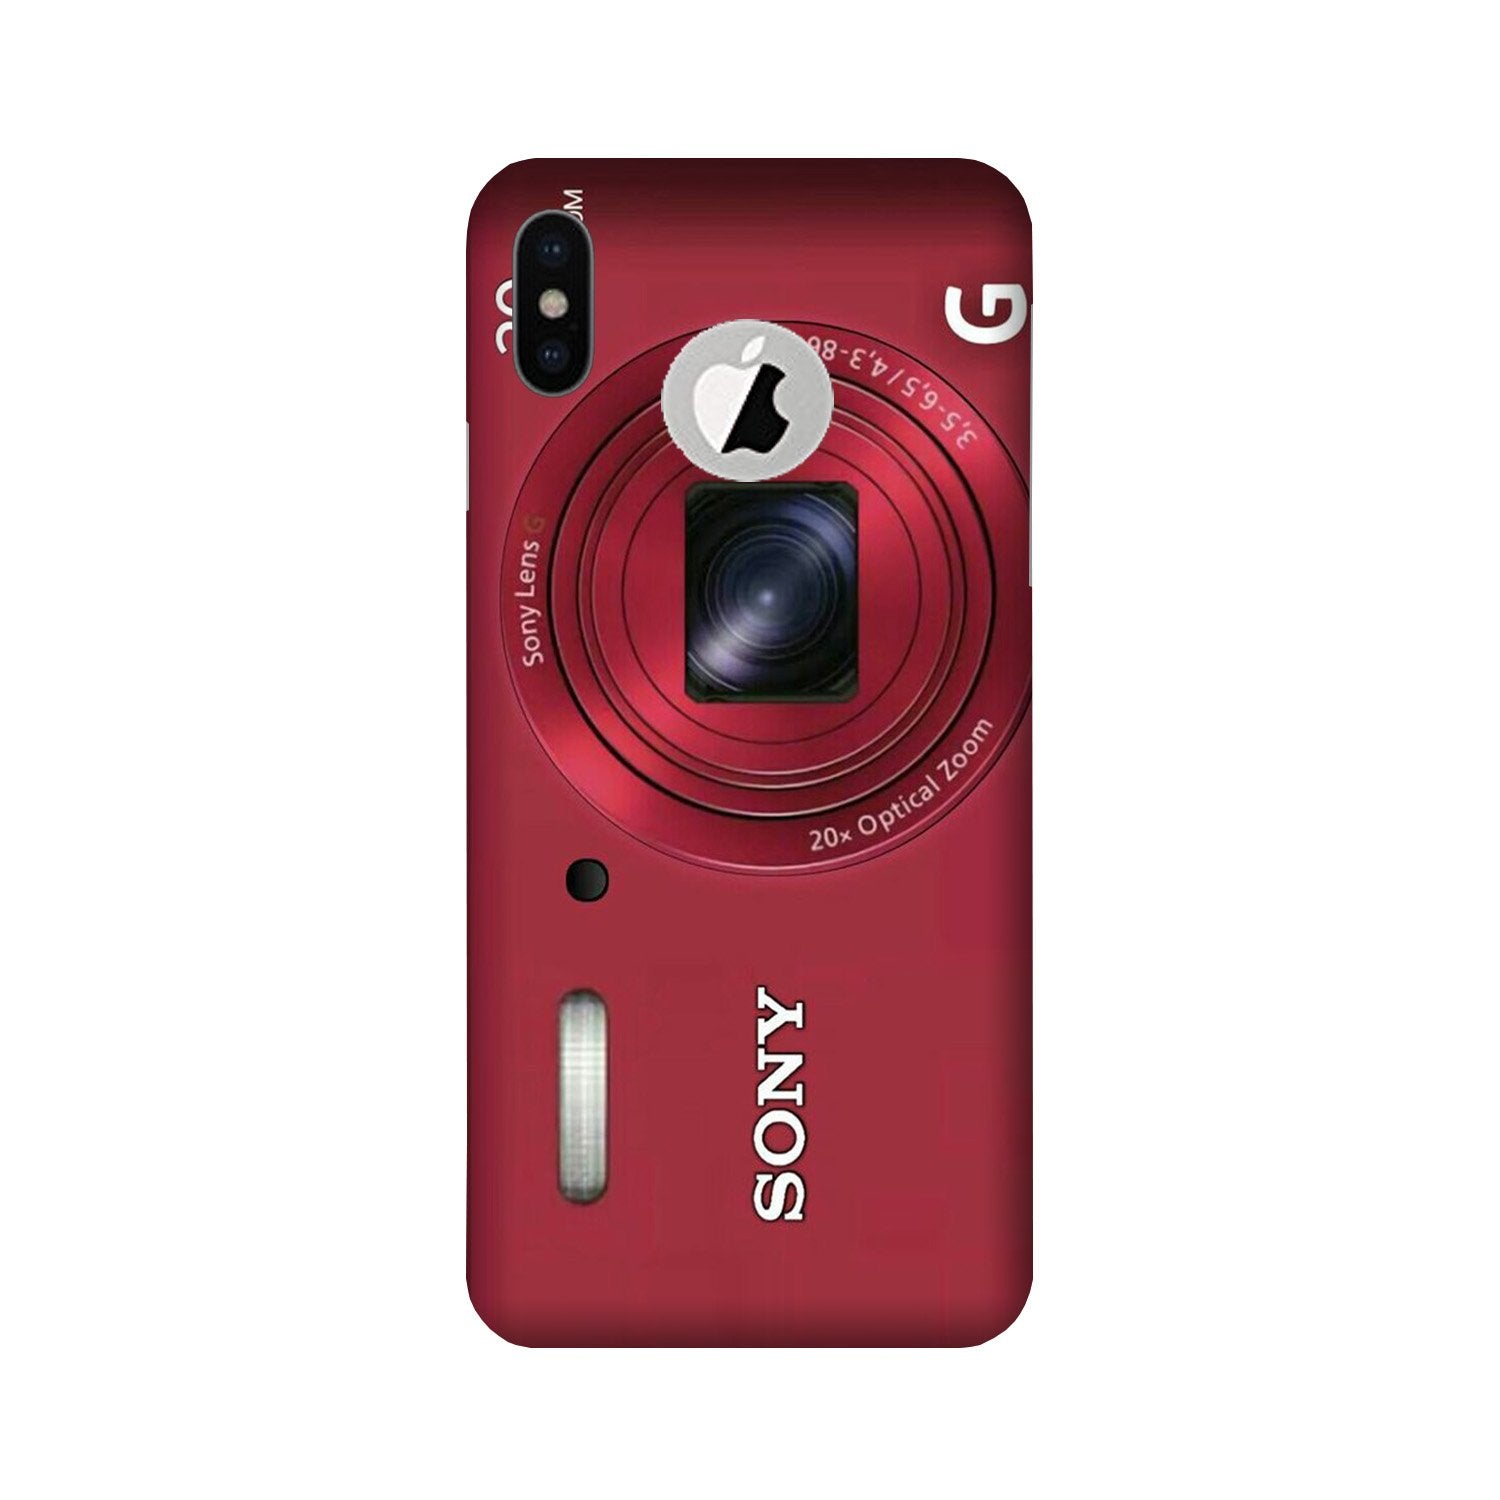 Sony Case for iPhone Xs logo cut  (Design No. 274)